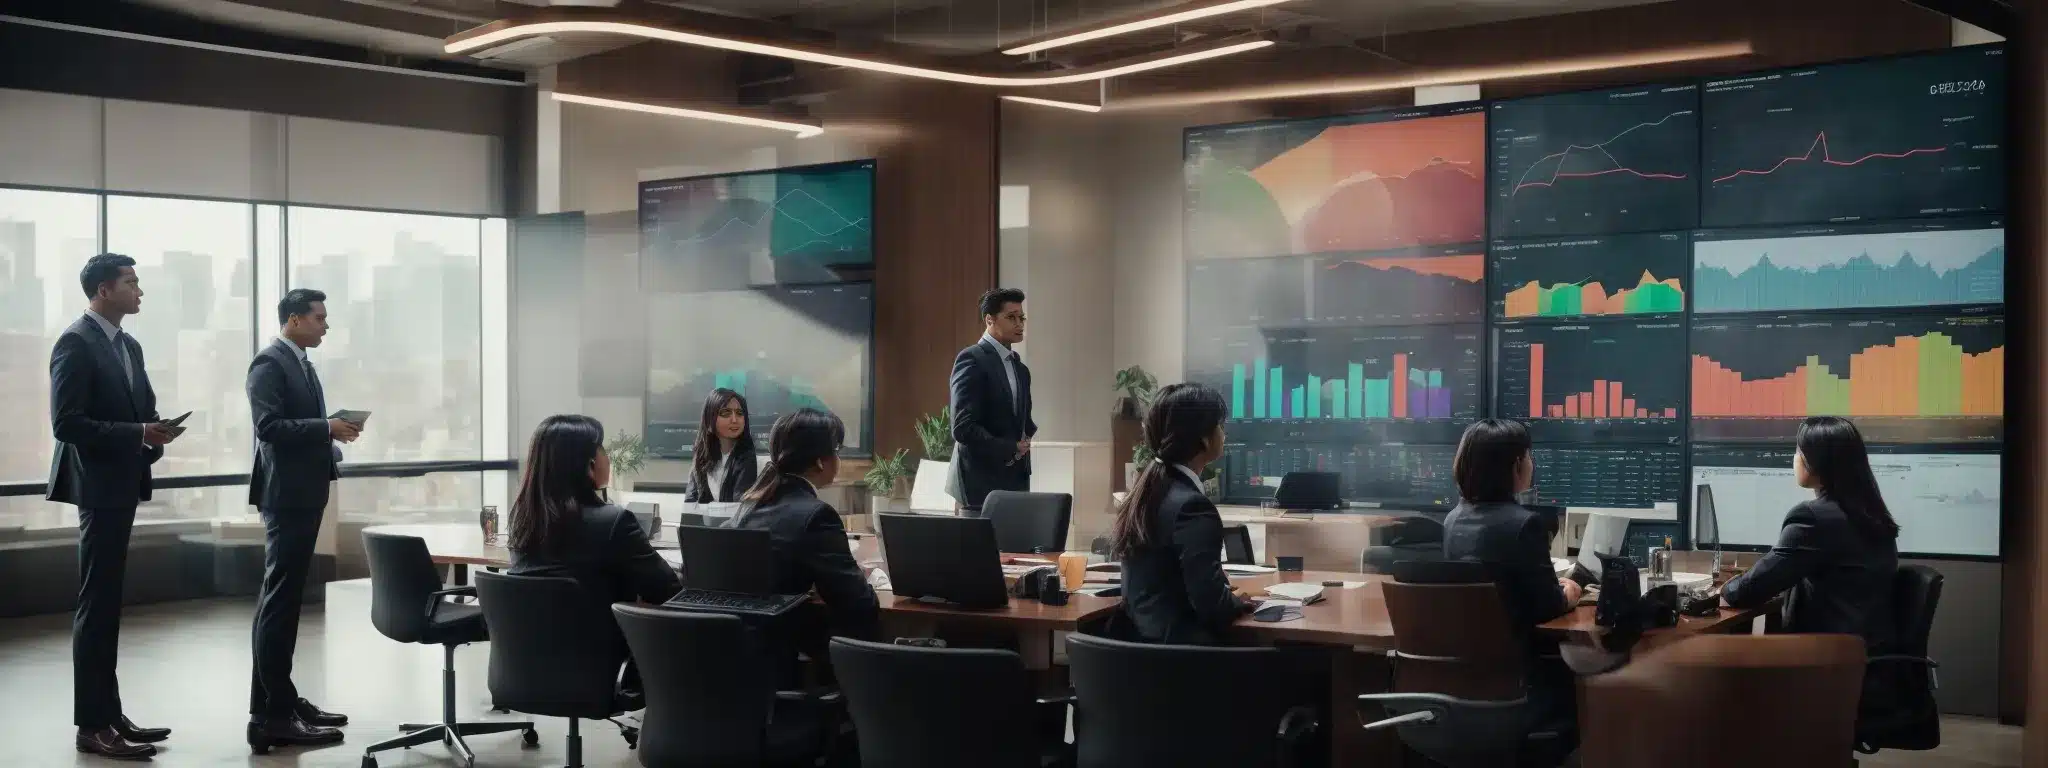 A Strategic Meeting Room With A Large Screen Displaying Colorful Graphs And Charts, With Intense Focus On Consumer Behavior And Sales Data.